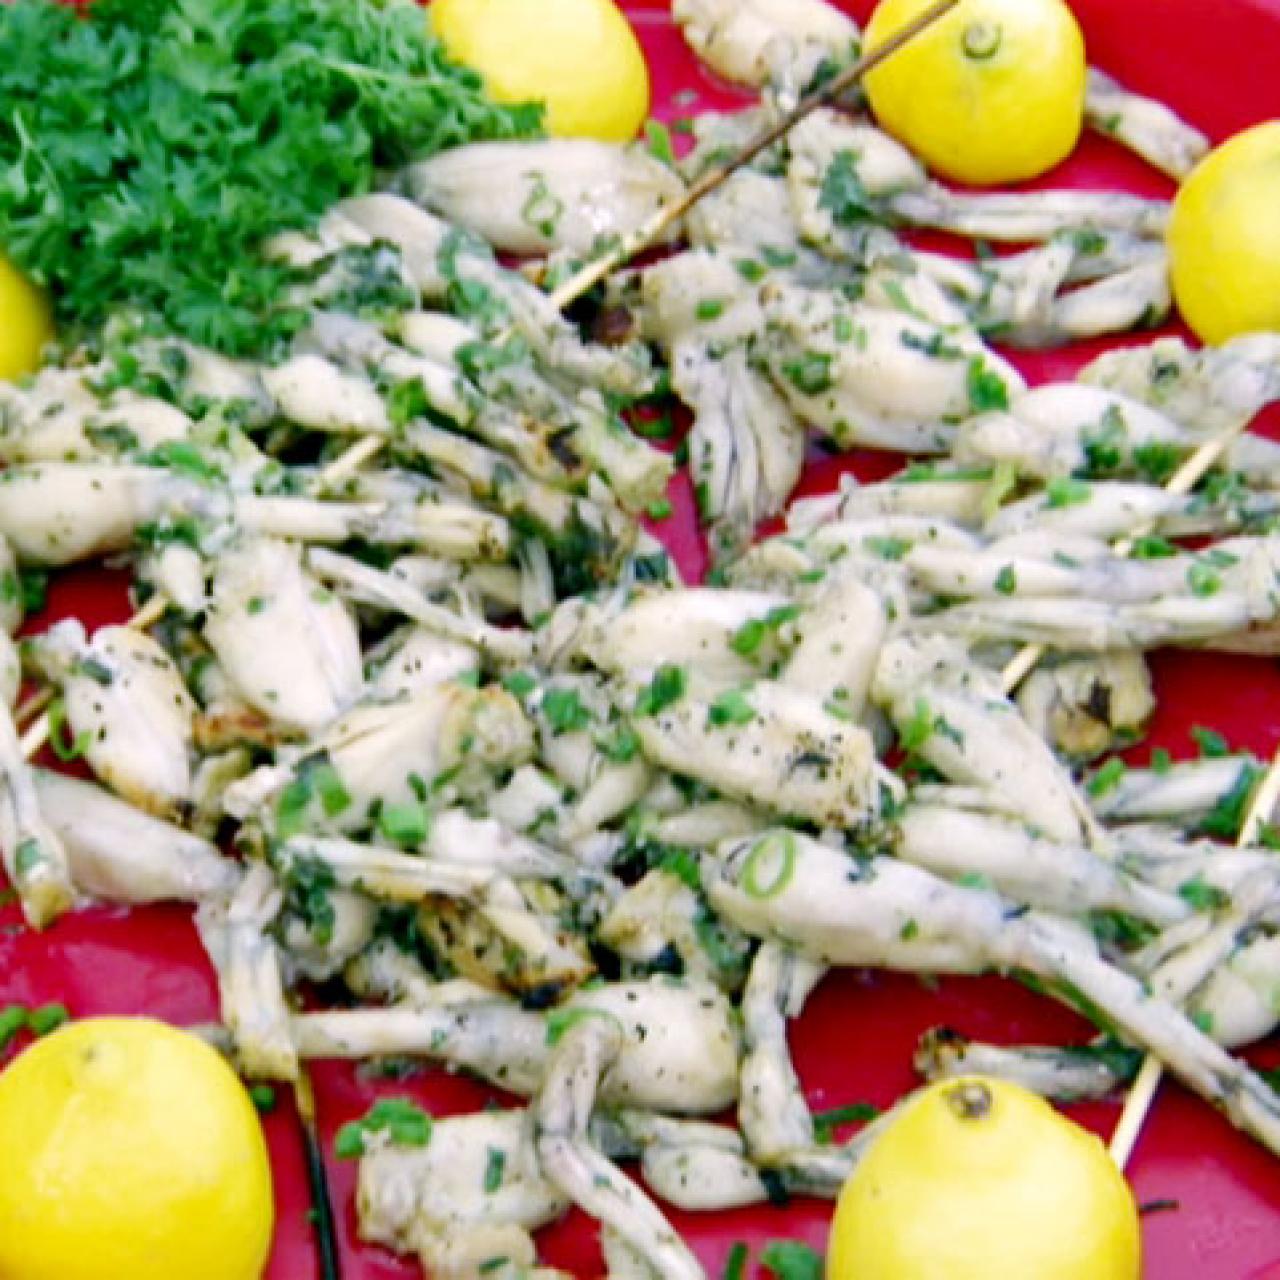 Frog Legs on The BBQ - Barbecue Tricks